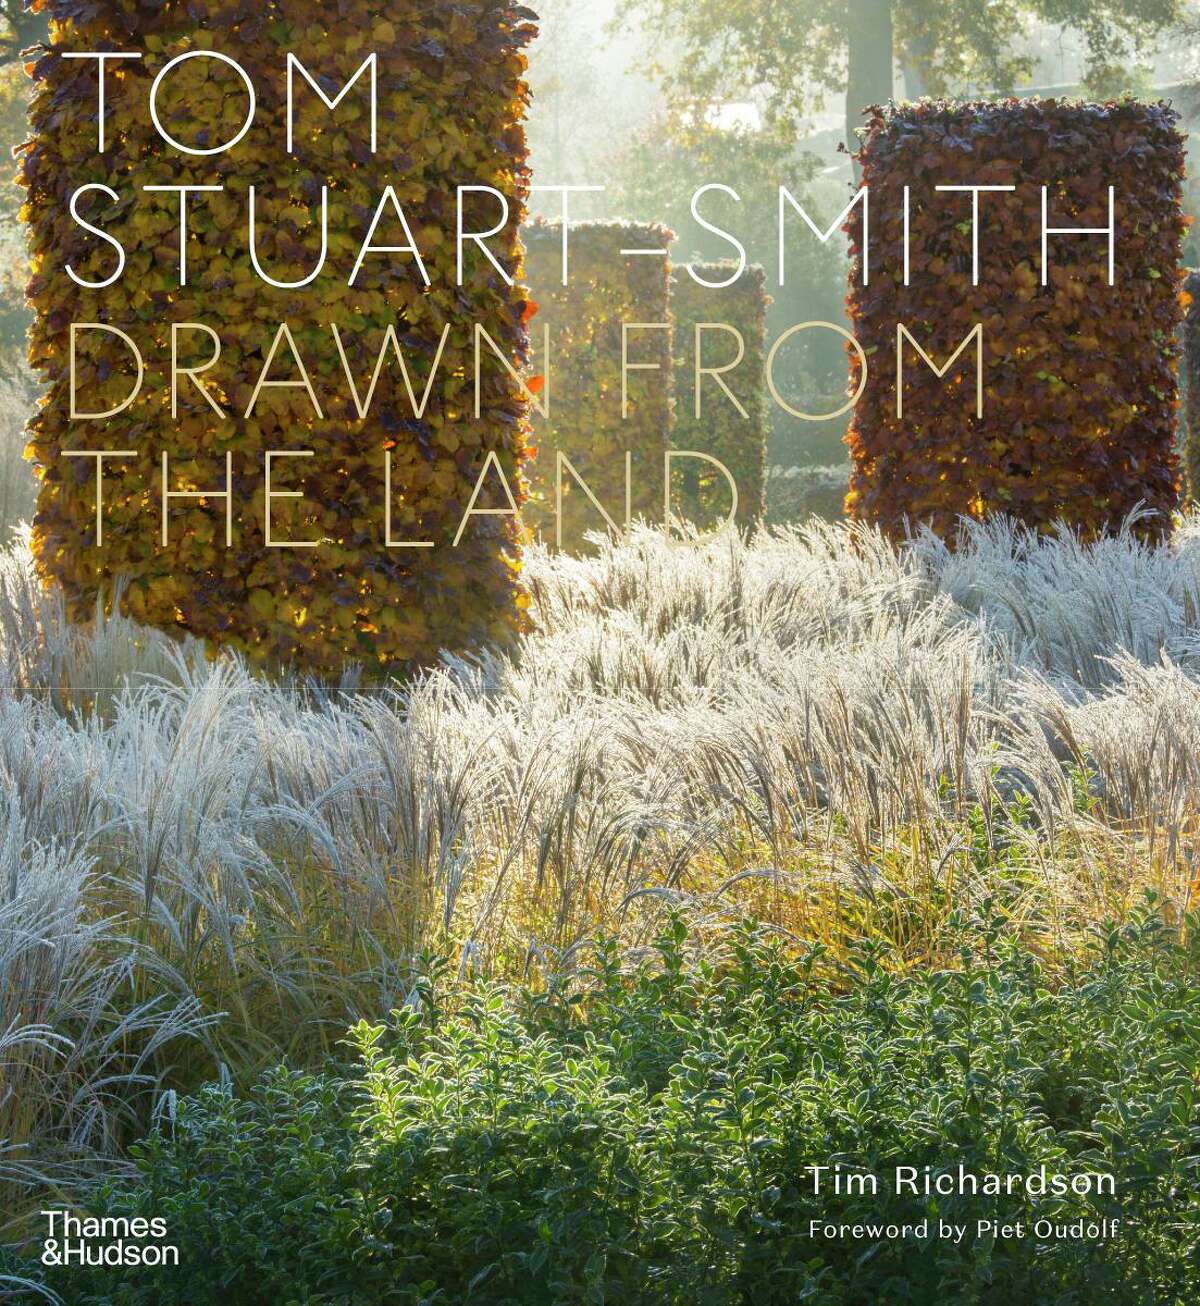 Tom Stuart-Smith's "Drawn from the Land"